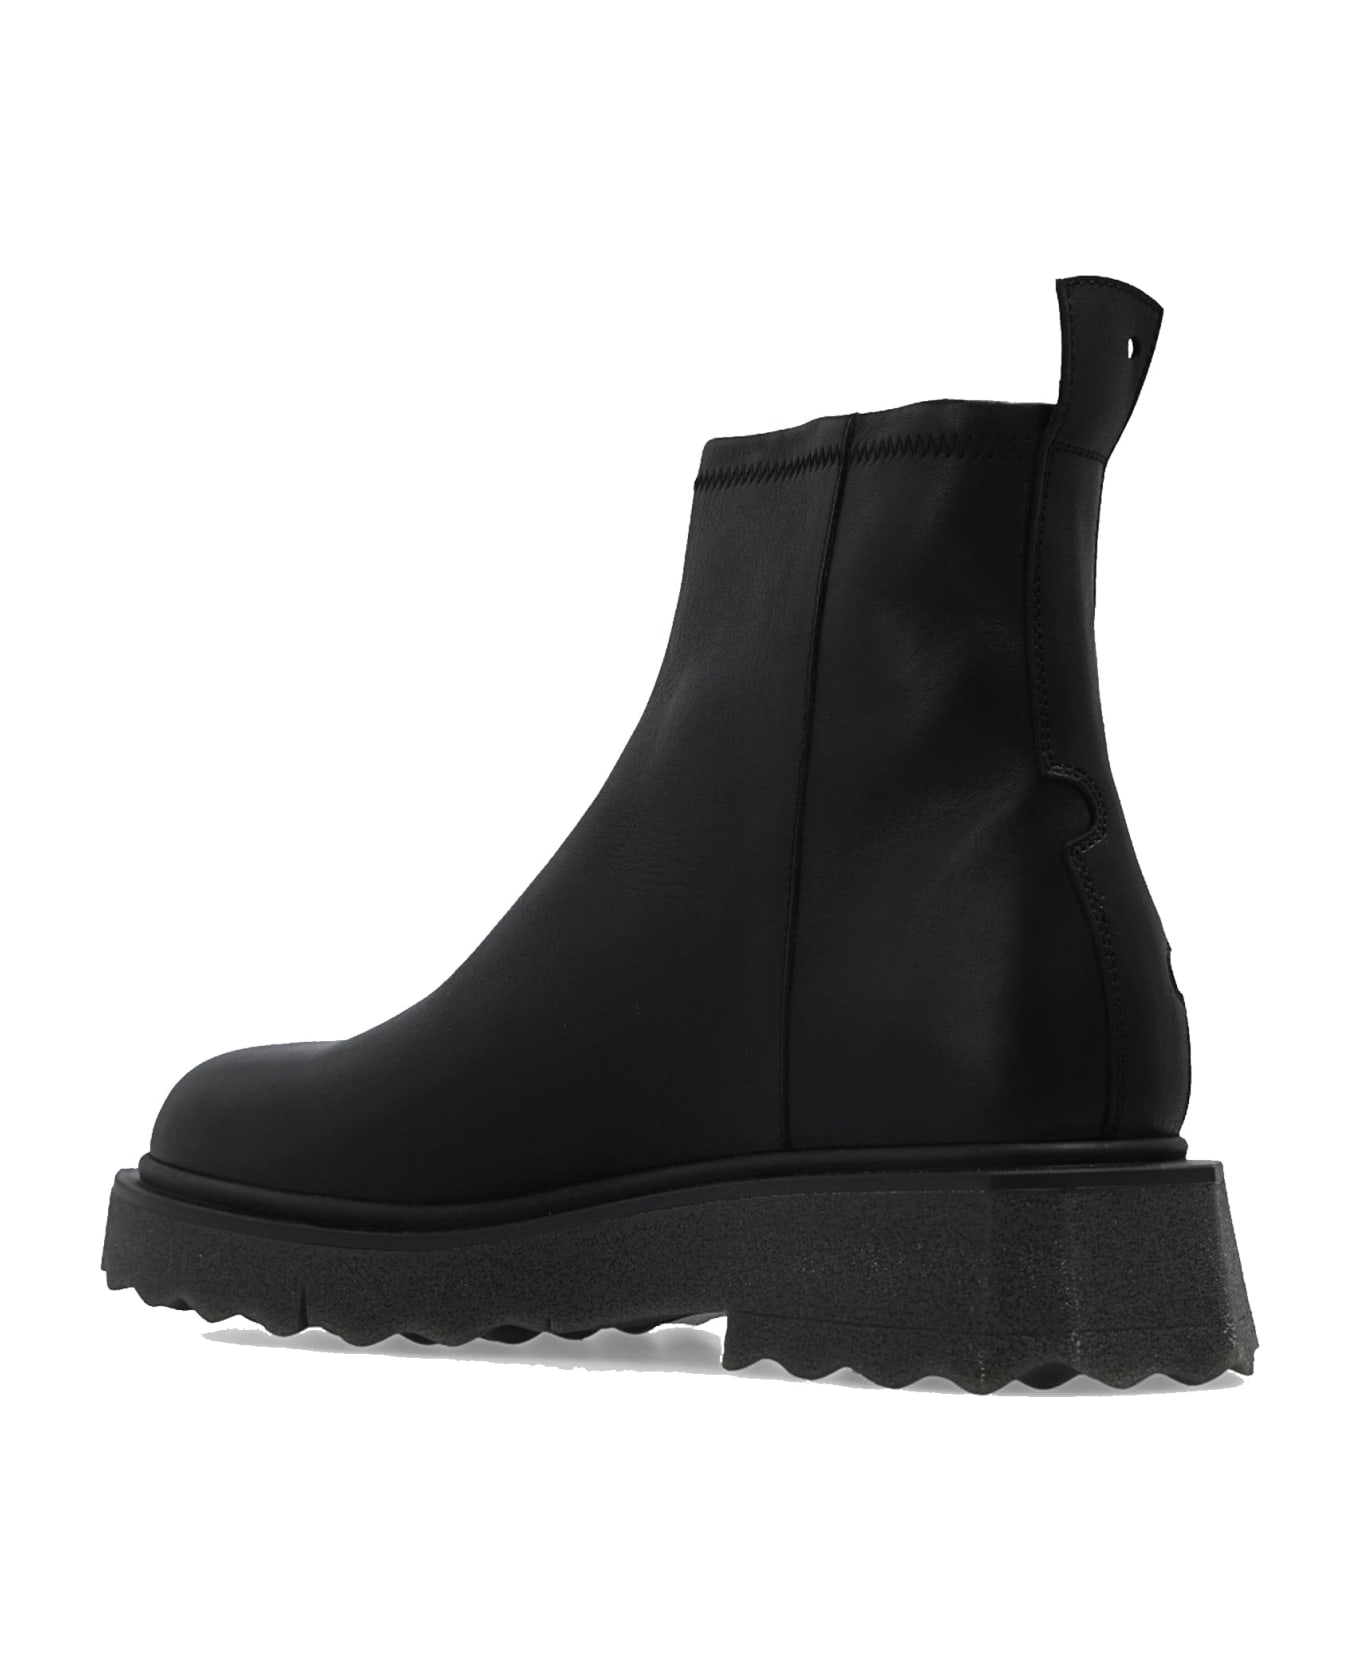 Off-White Ankle Leather Boots - Black ブーツ